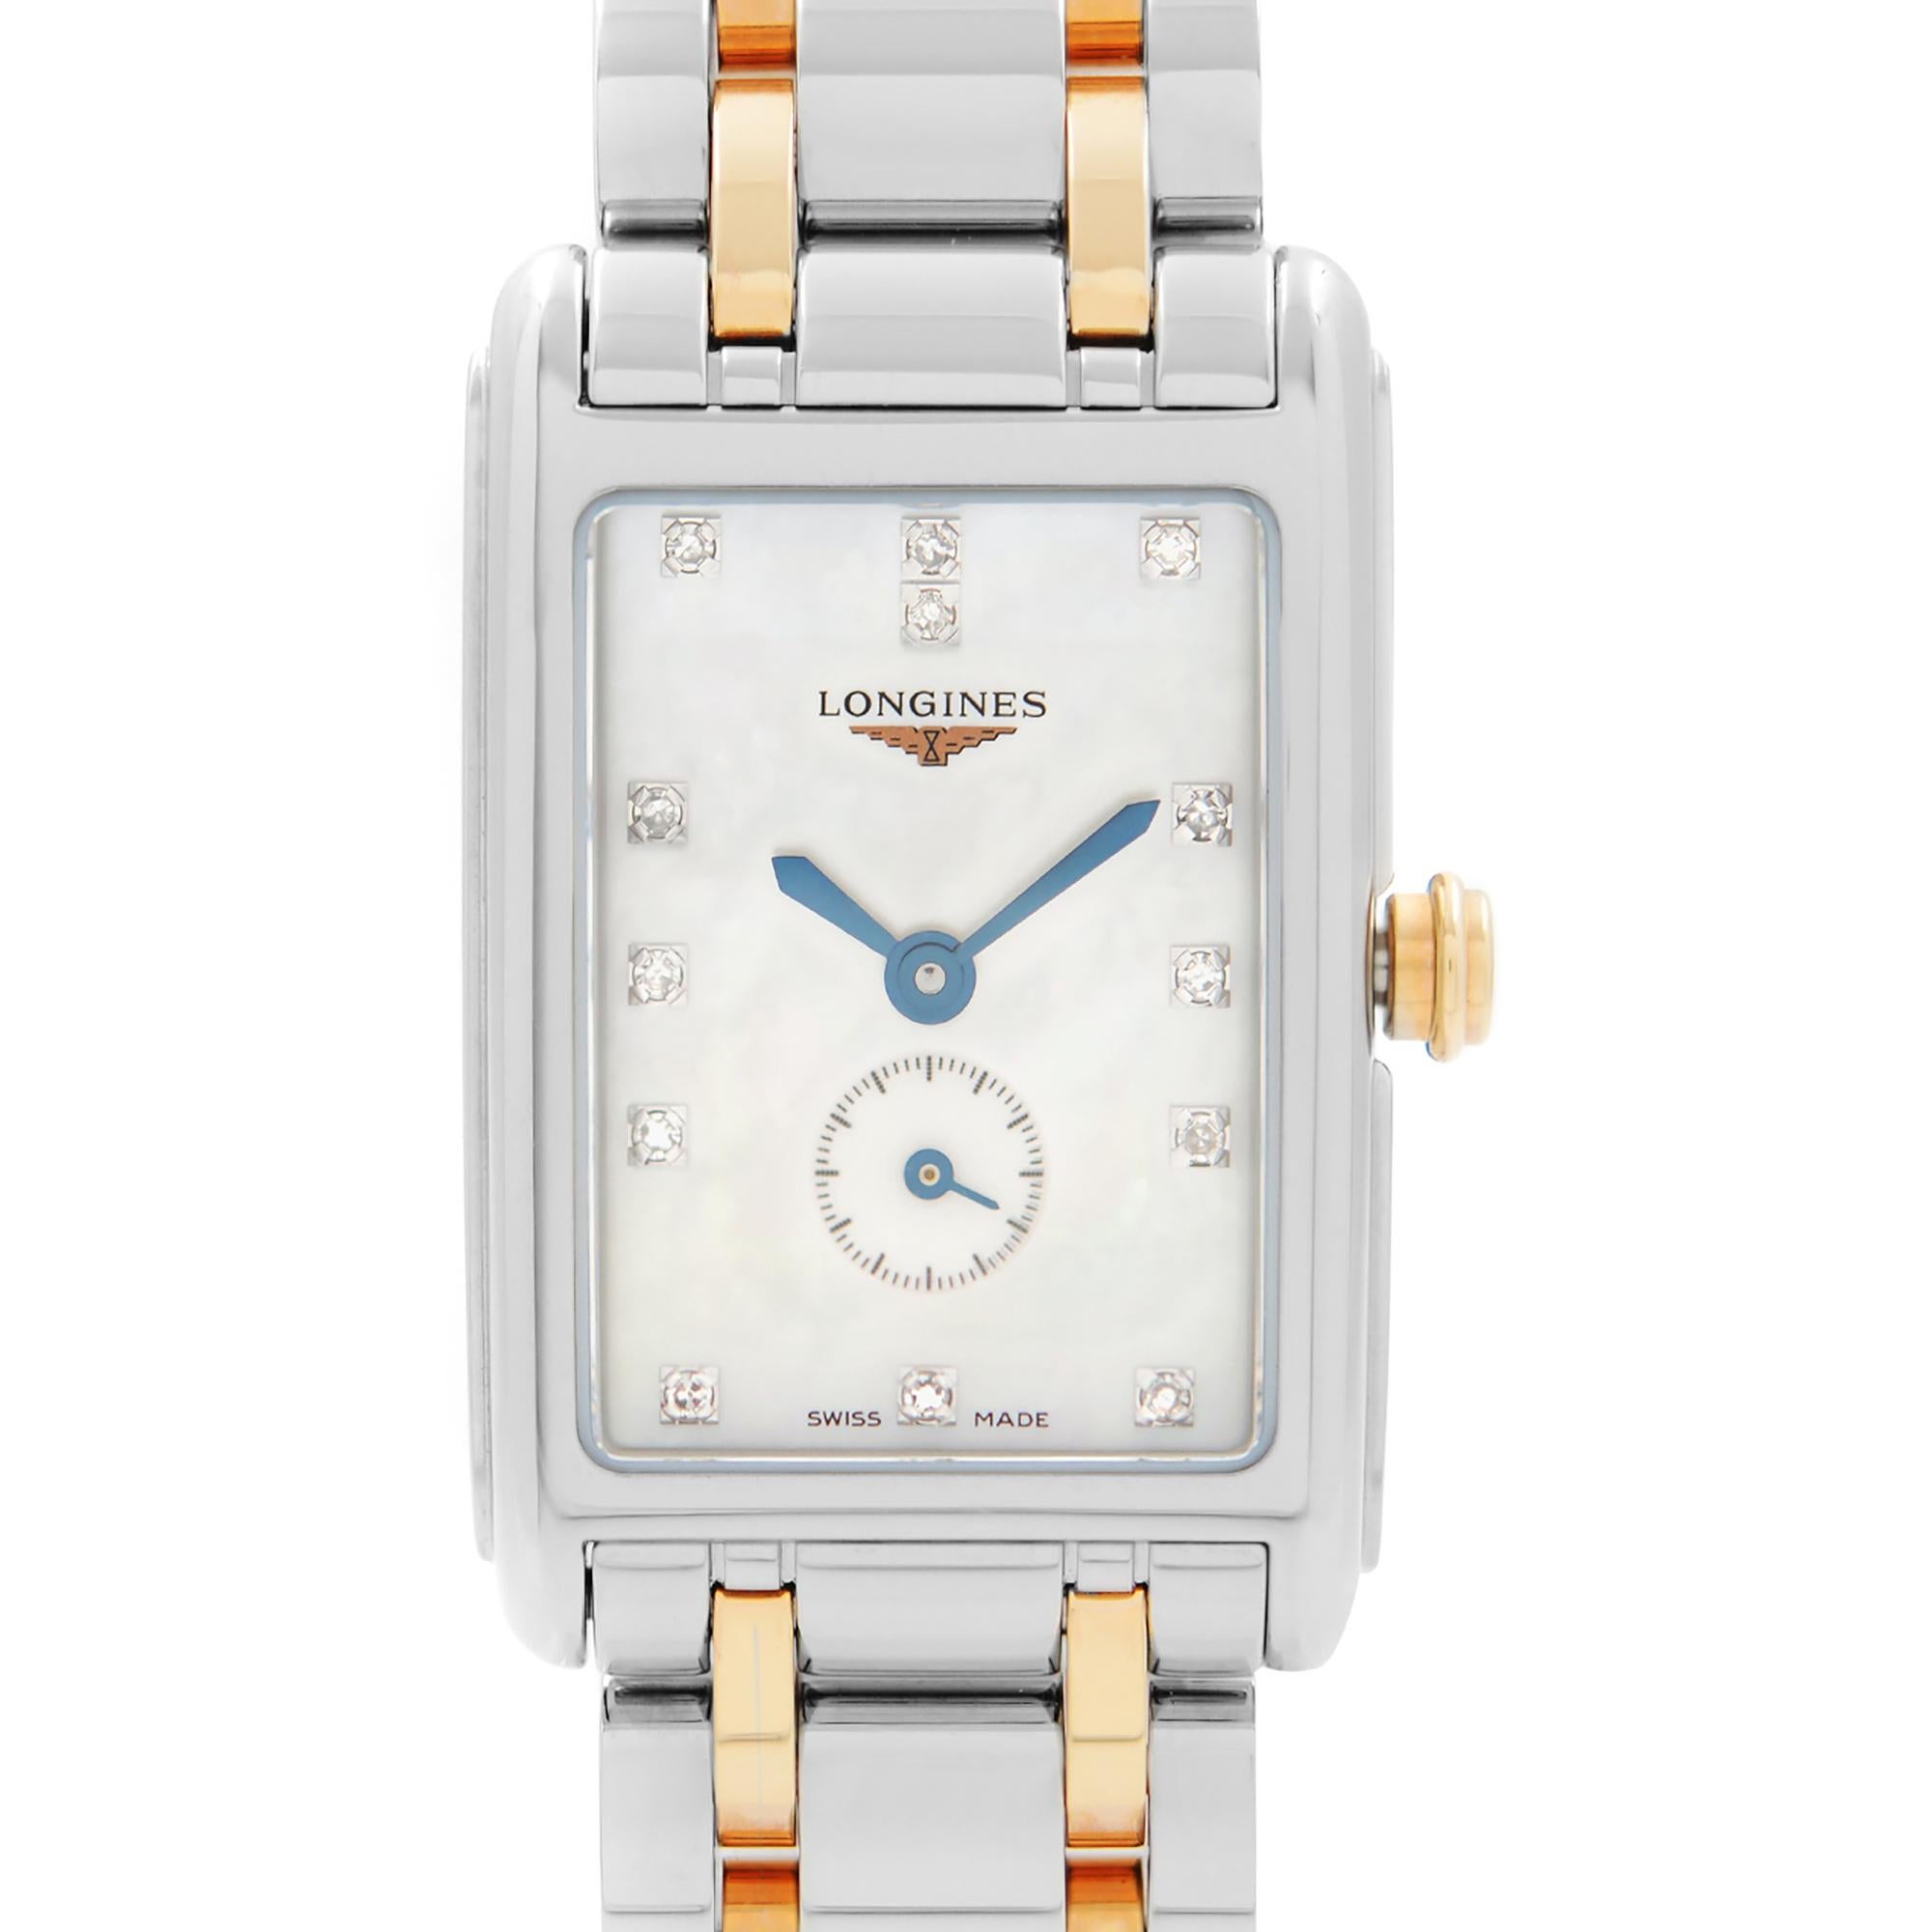 Unworn Longines DolceVita Two-Tone Steel MOP Diamond Dial Quartz Ladies Watch L5.255.5.87.7. This Beautiful Timepiece is Powered by a Quartz (Battery) Movement And Features: Rectangular Stainless Steel Case with a Two-Tone Stainless Steel Bracelet,